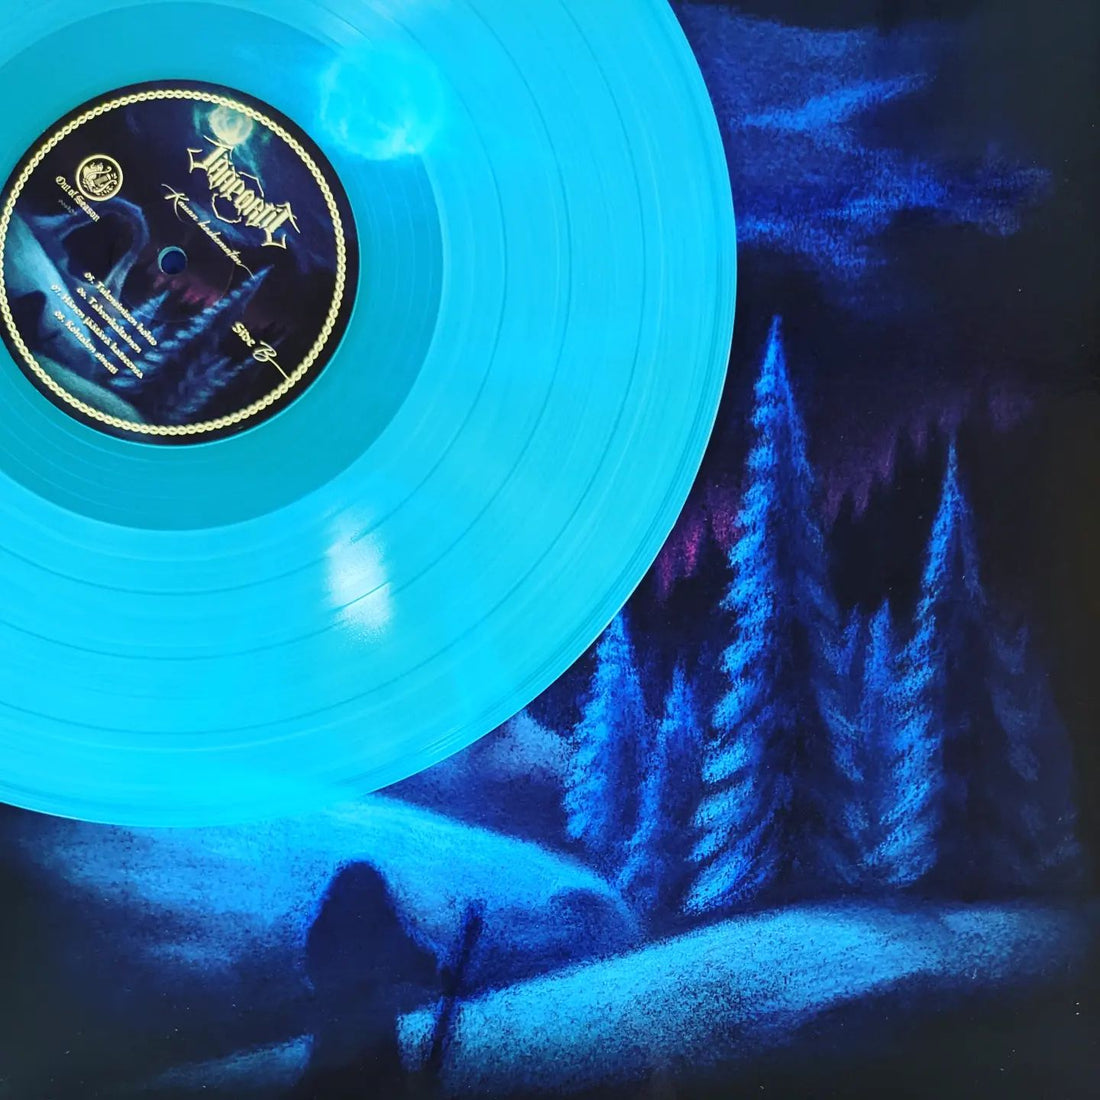 Out Monday Sept 5 at 2PM EST. Limited to 300 copies on ice blue vinyl with big A2 size glossy poster